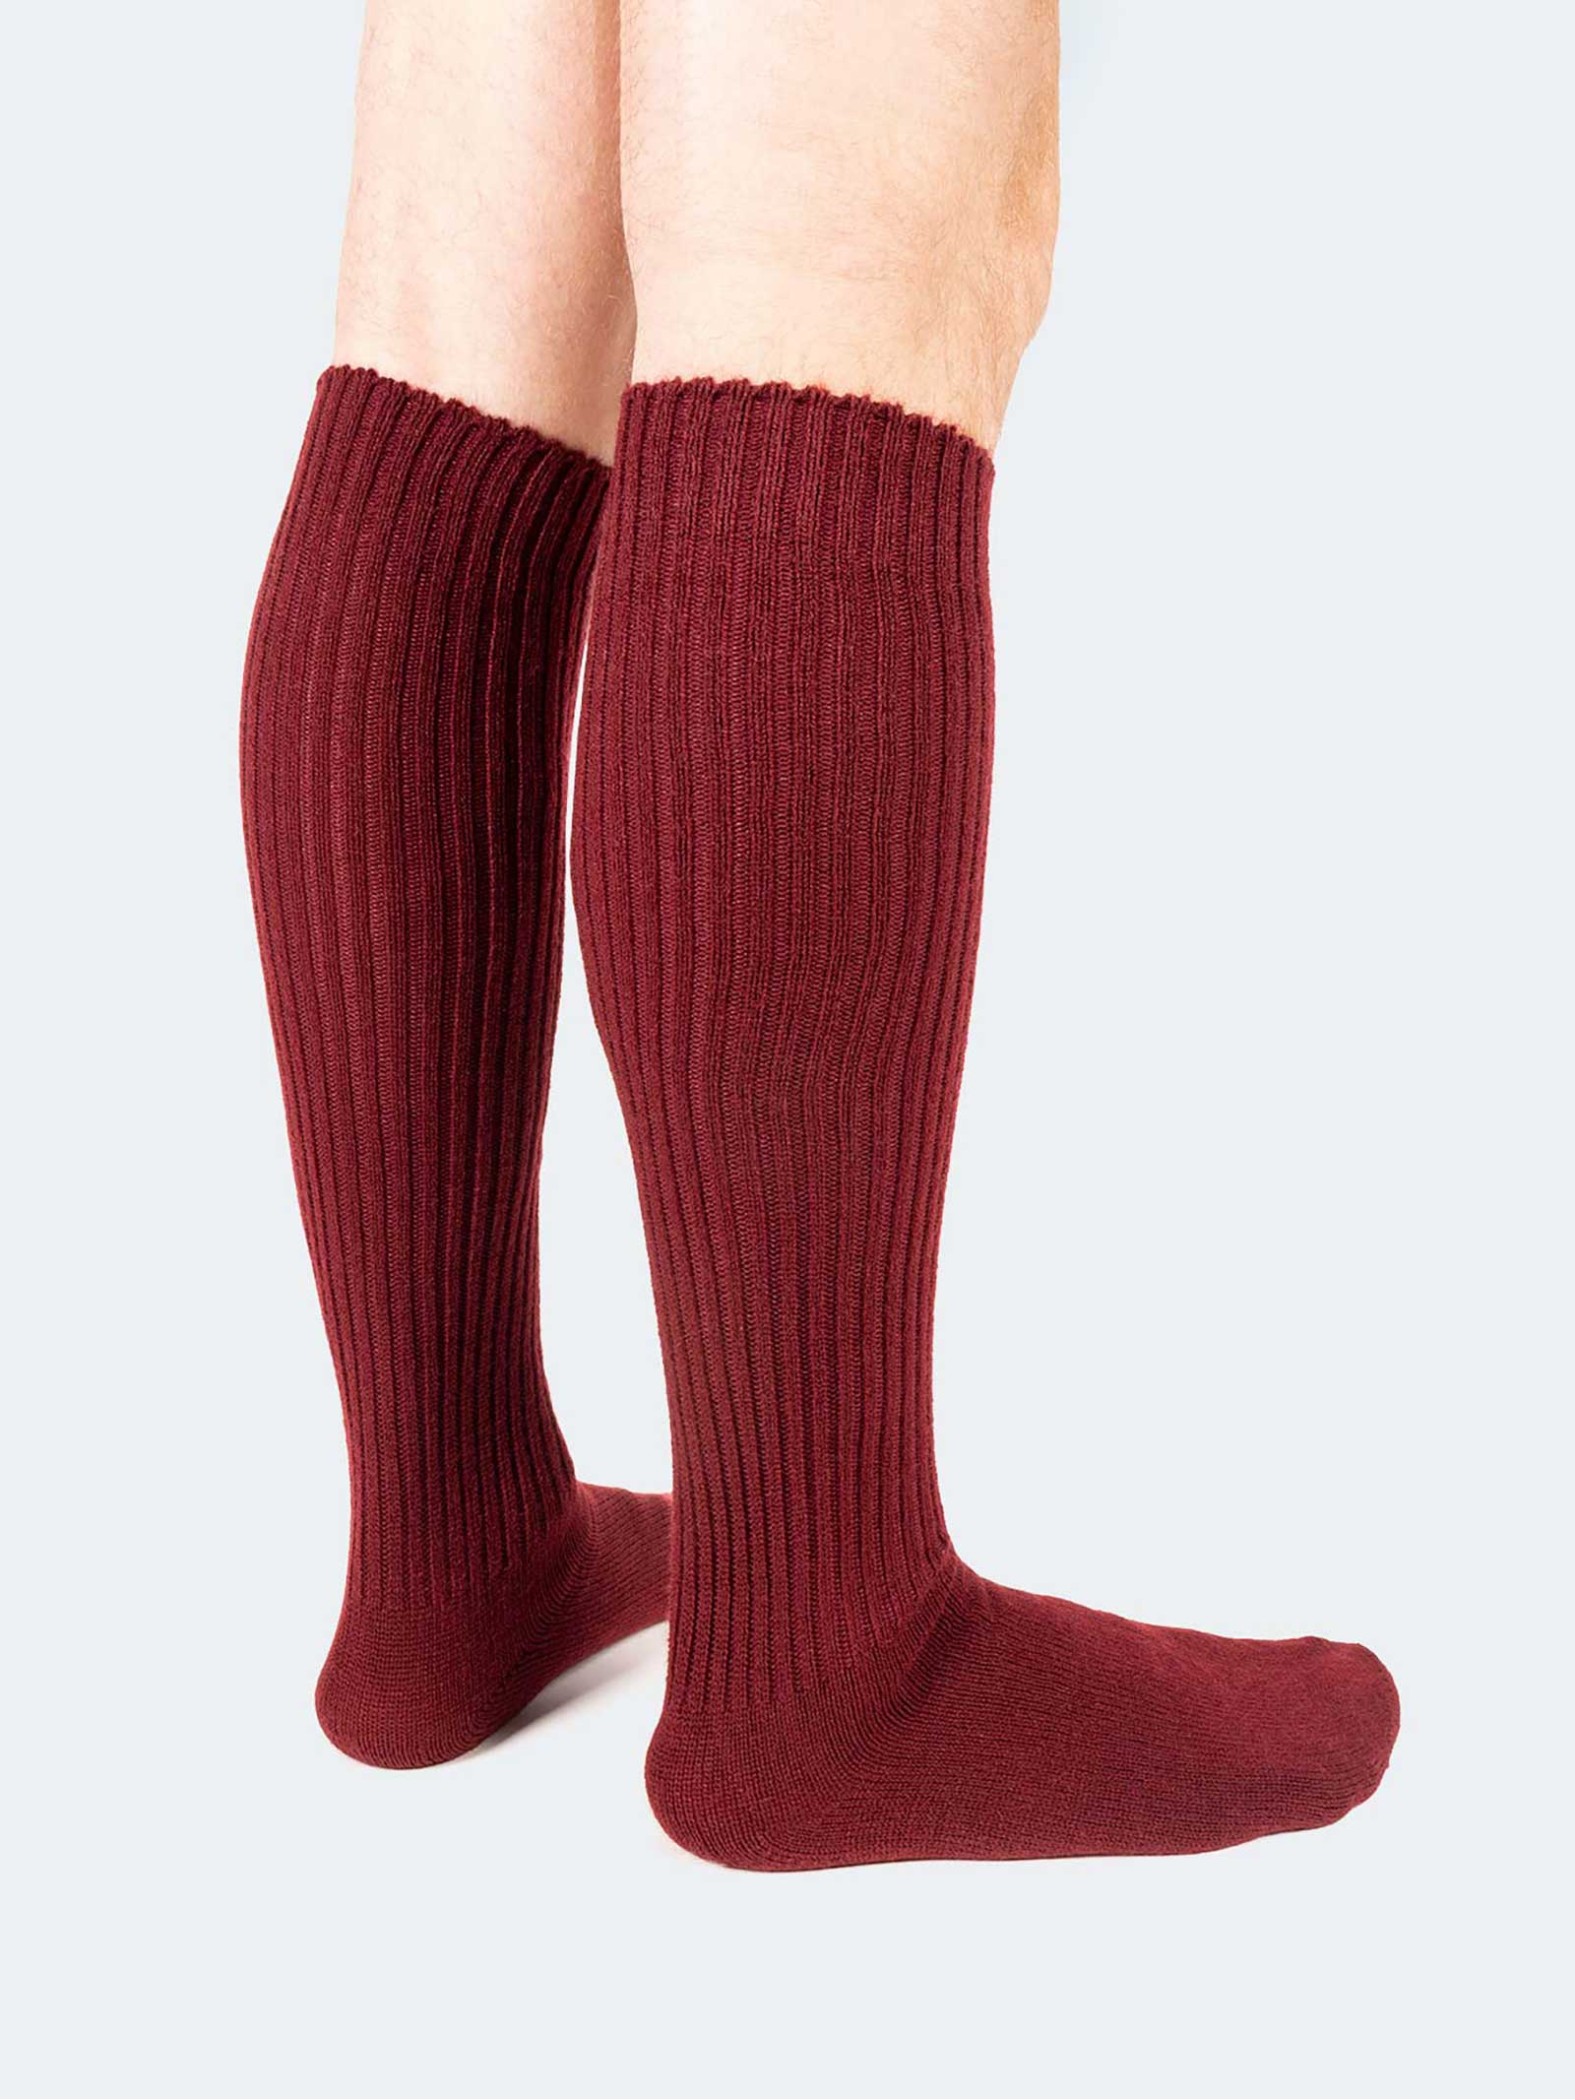 Soft Knee high socks - Made in italy